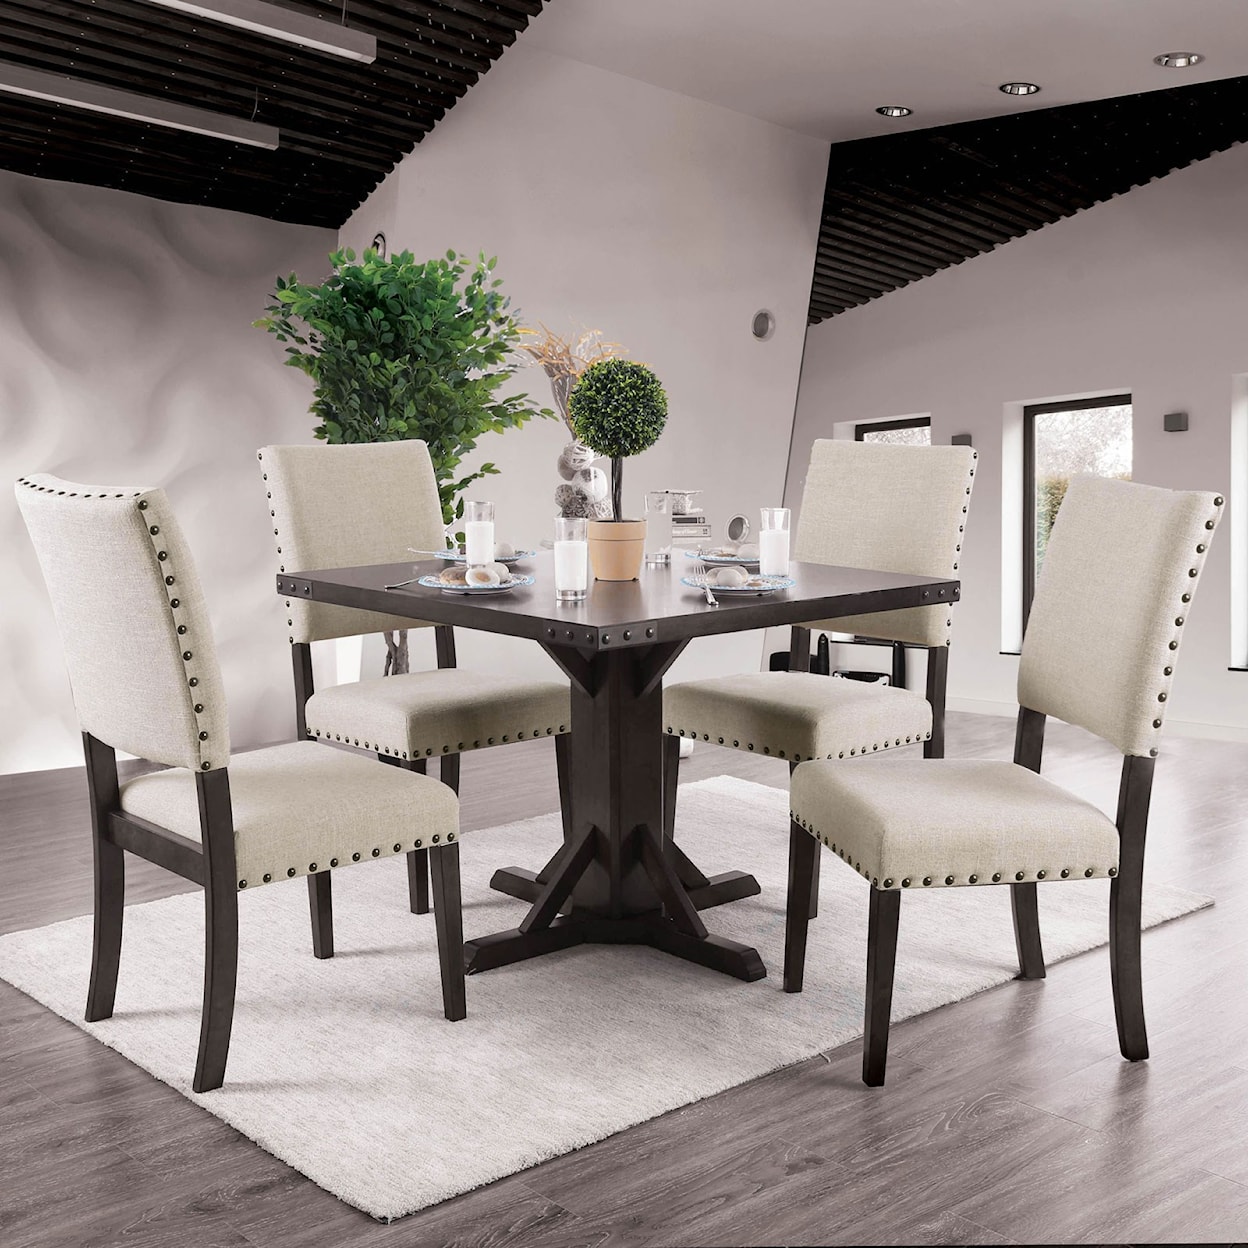 Furniture of America Glenbrook Table + 4 Chairs